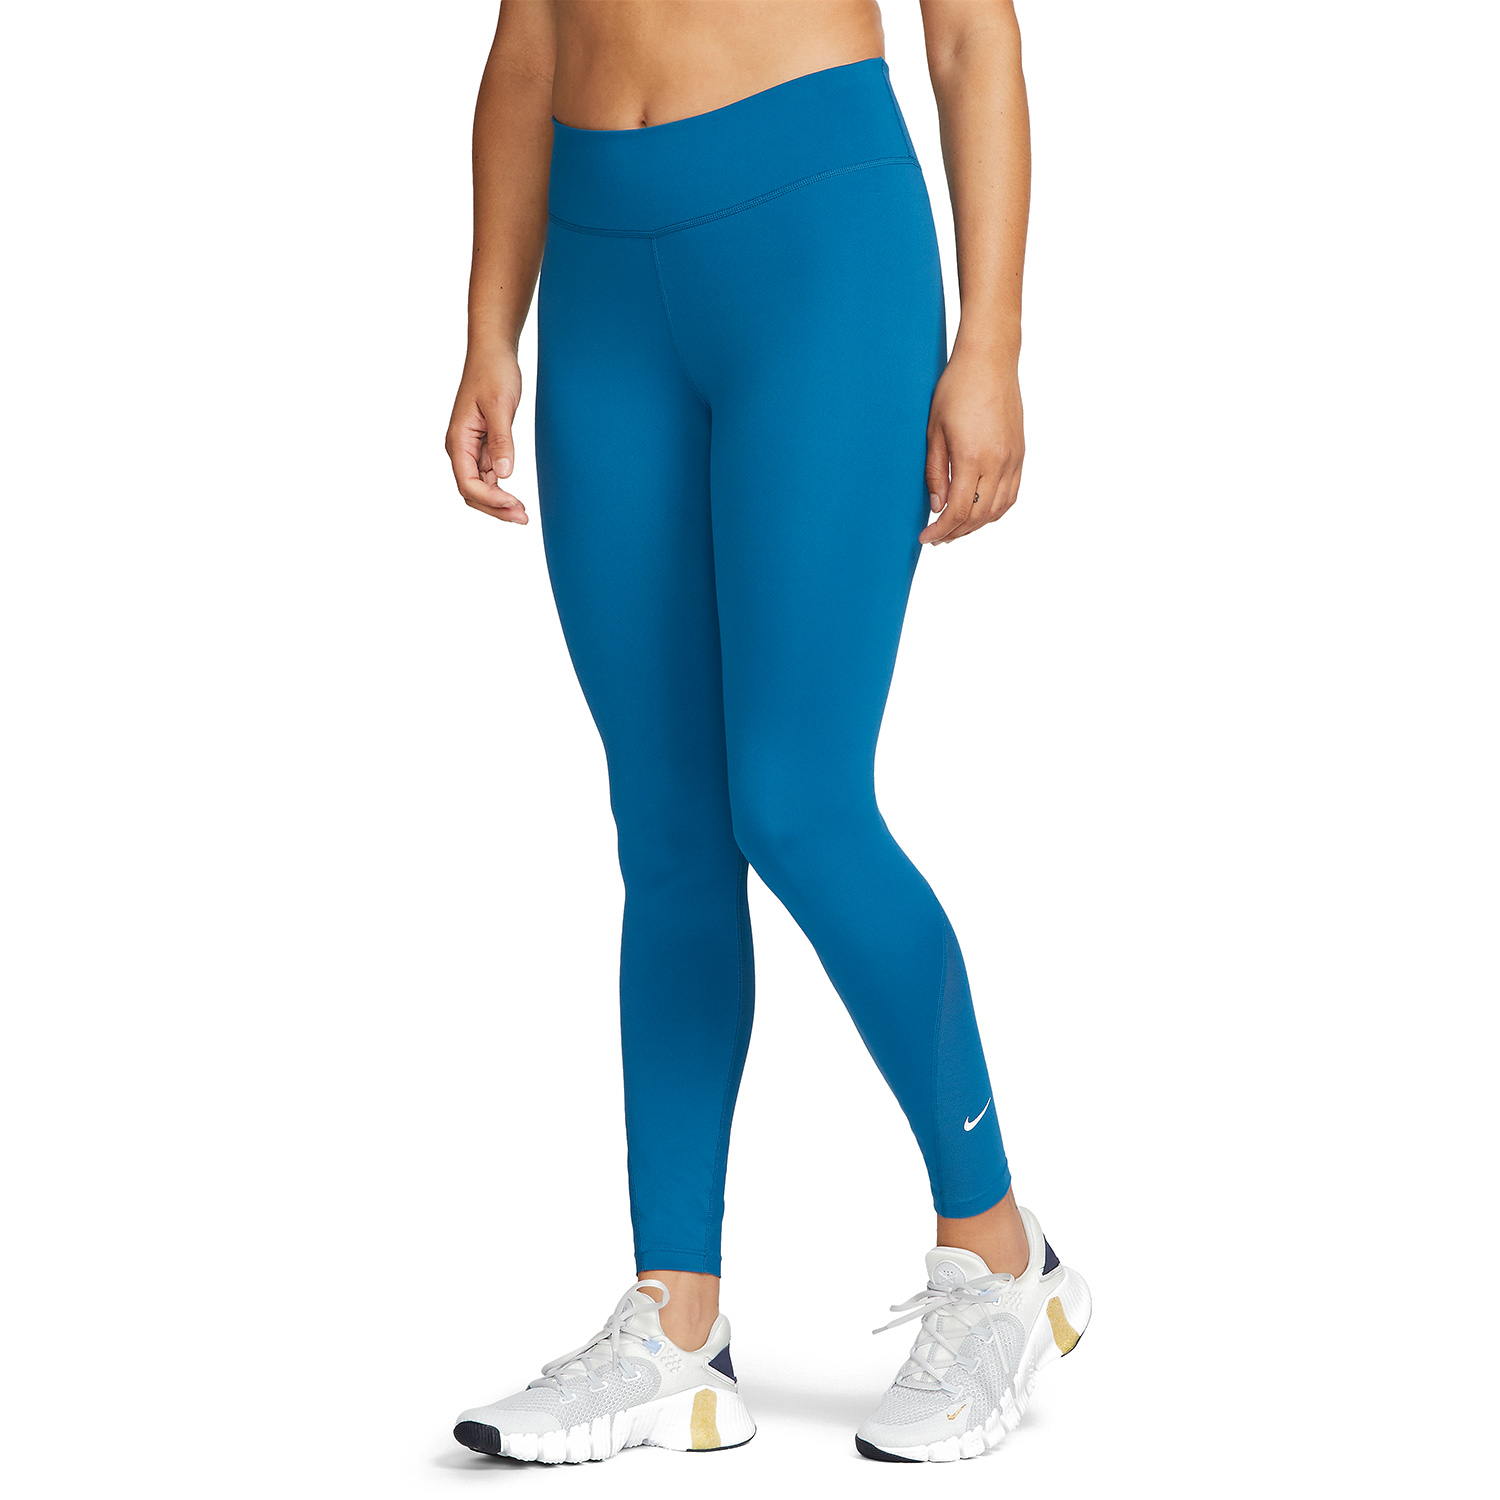 https://www.misterrunning.com/images/2023-media-05/nike-one-mid-rise-7-8-tights-allenamento-donna-industrial-blue-dd0249-457_A.jpg